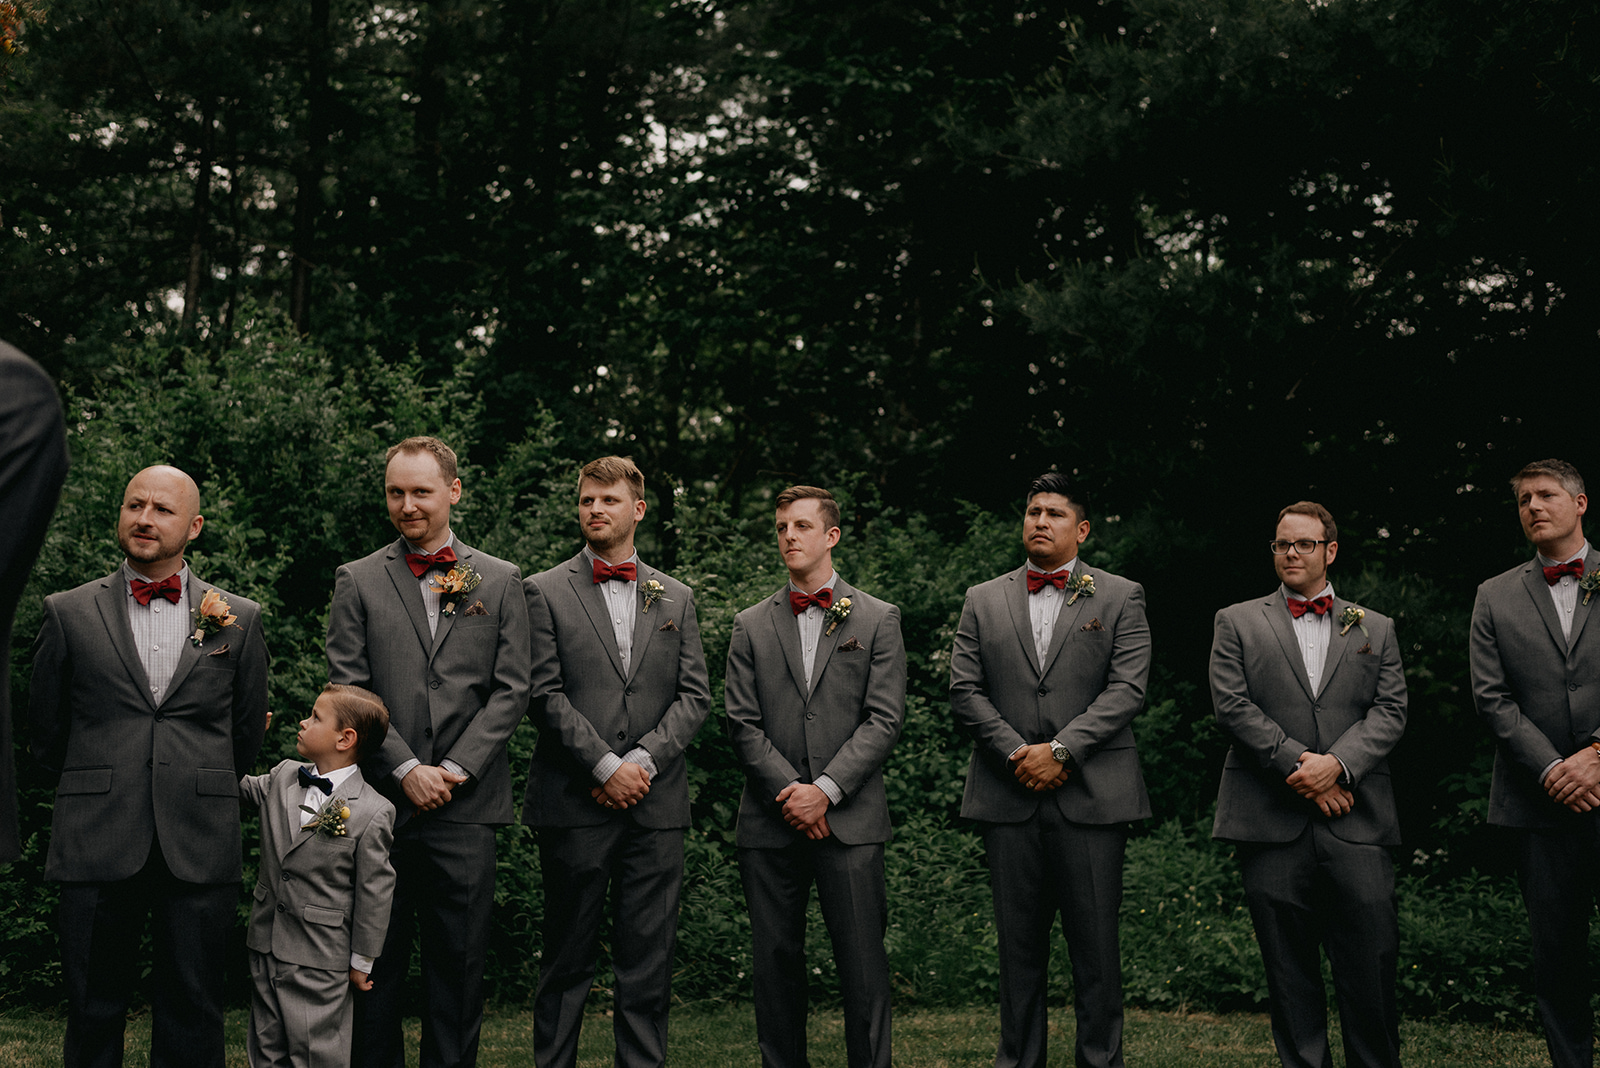 Groomsmen dress in grey suits with red bowties - Pearl Weddings & Events